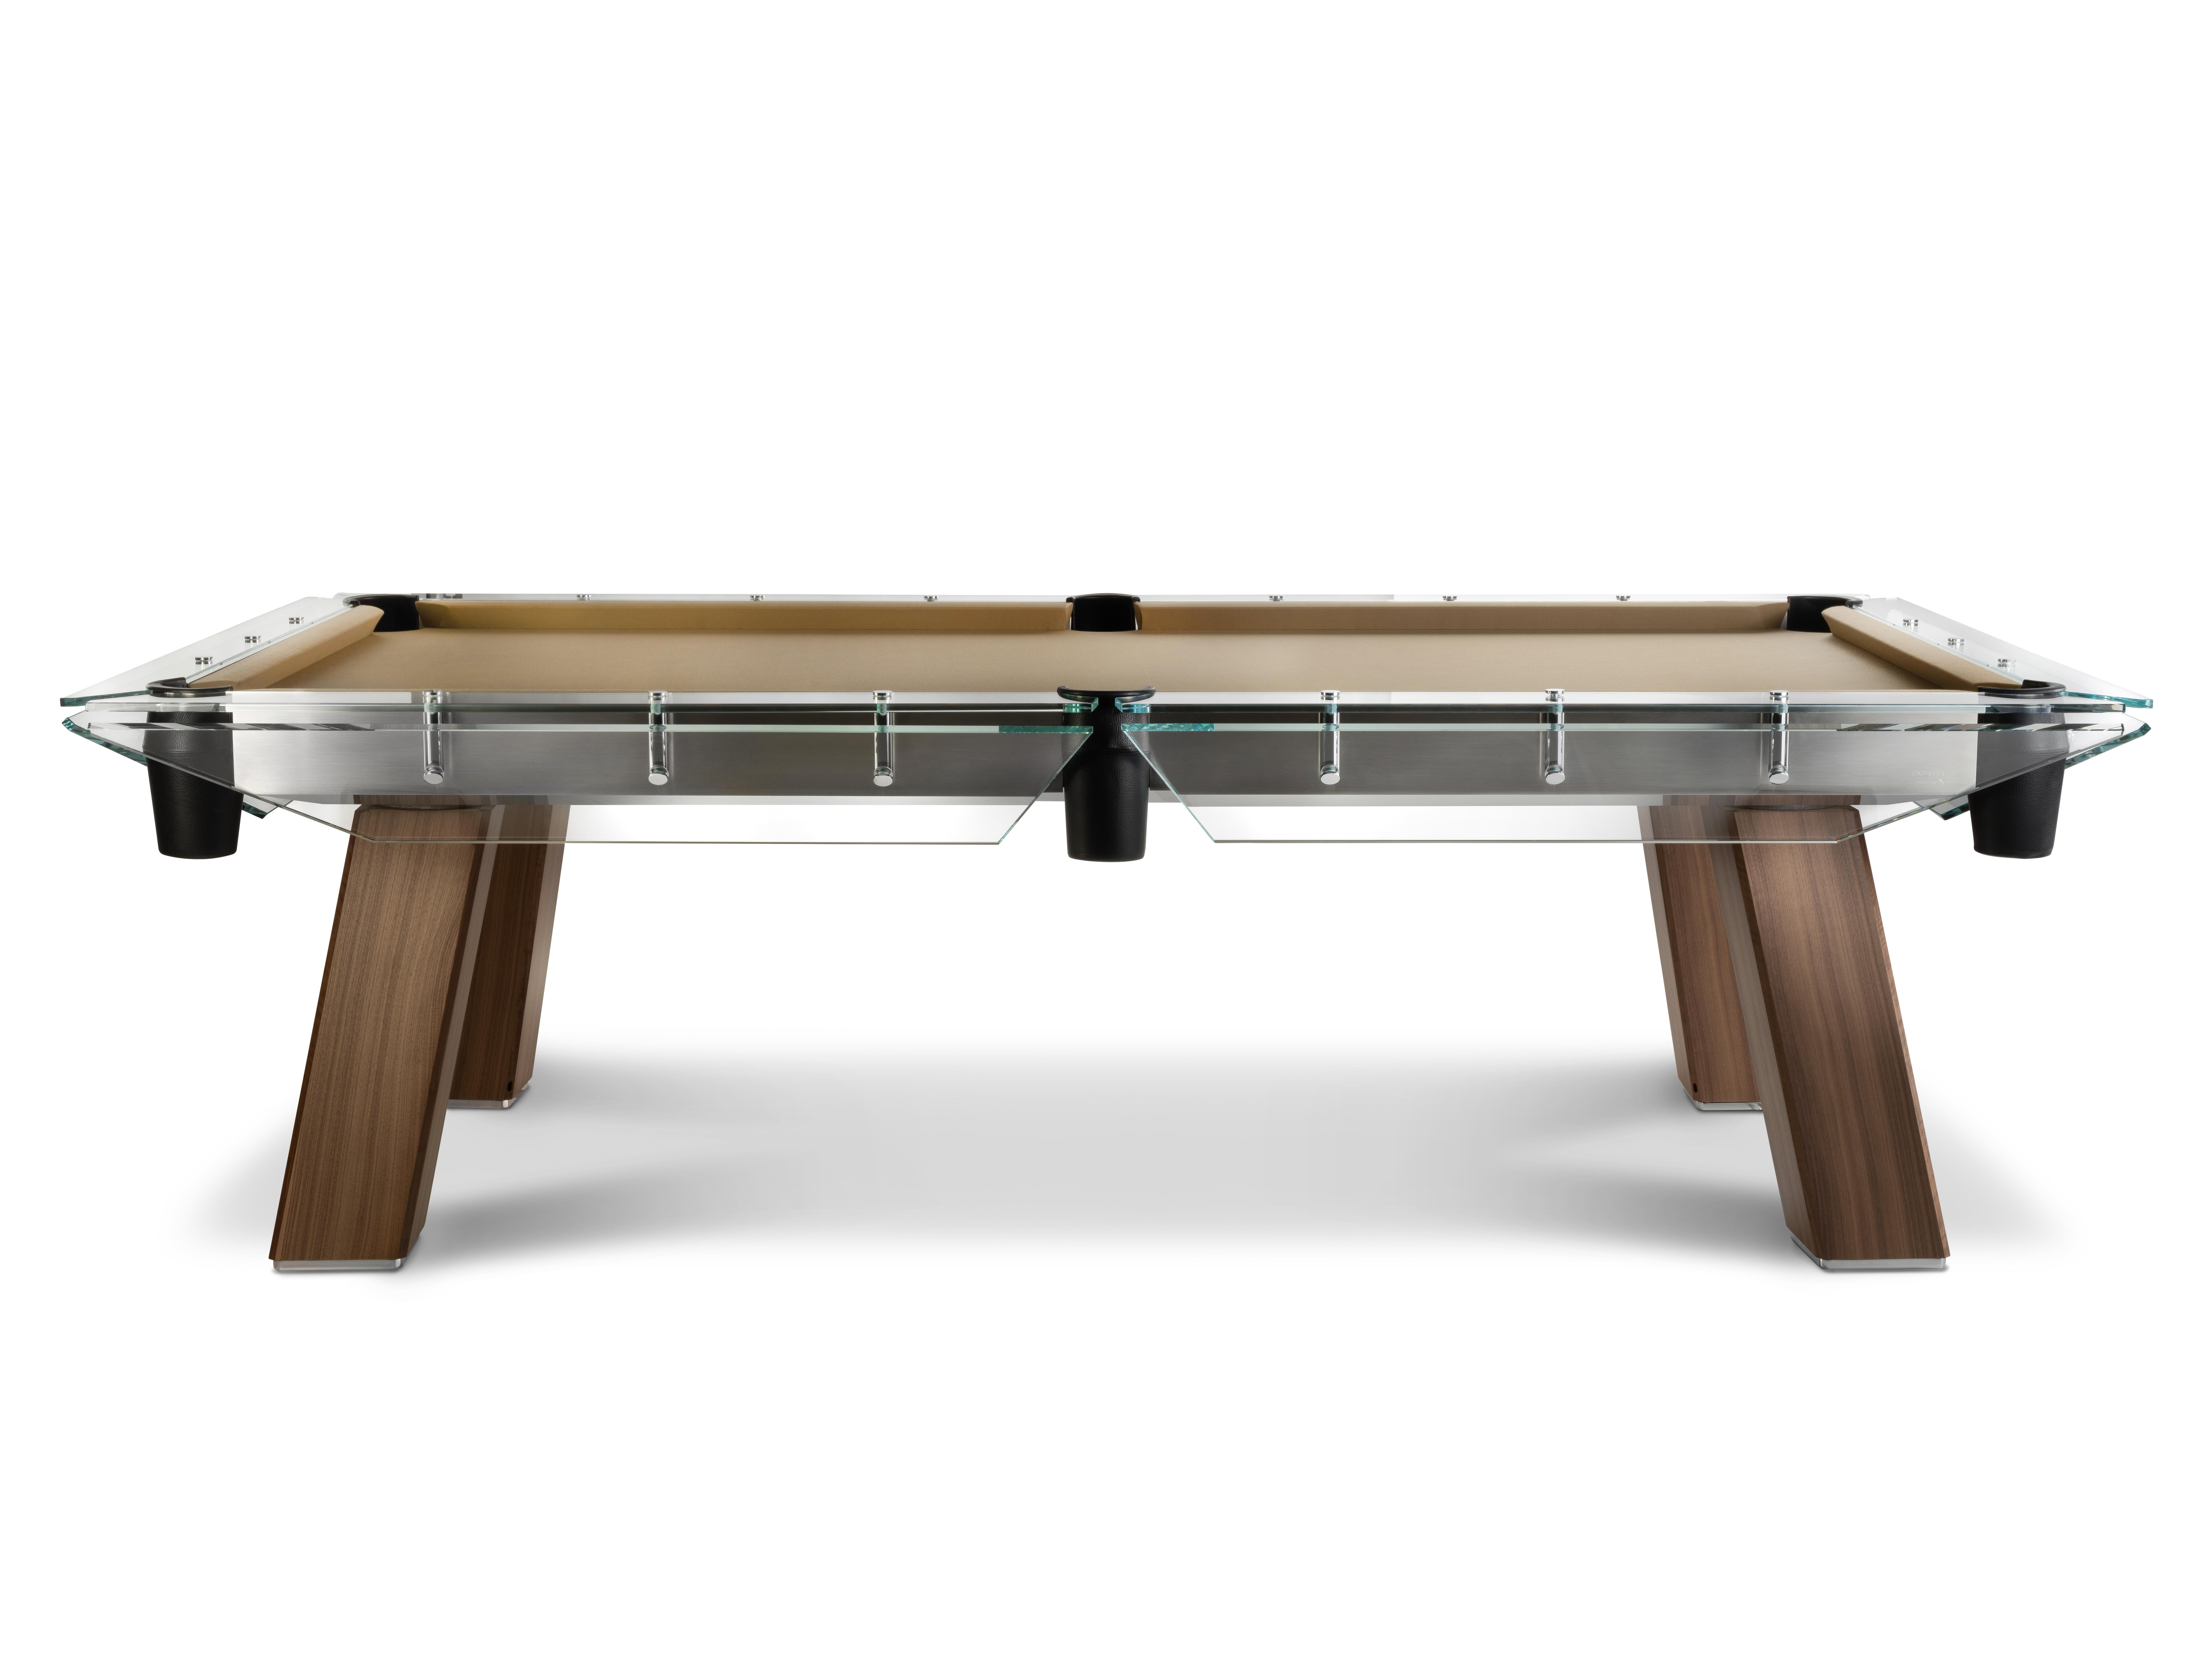 Filotto wood edition billiard table gives a new life, new characteristics, and new values to a classic product. The design, construction, and workmanship of this work of genius are all Italian, showcasing the highest expression of technological